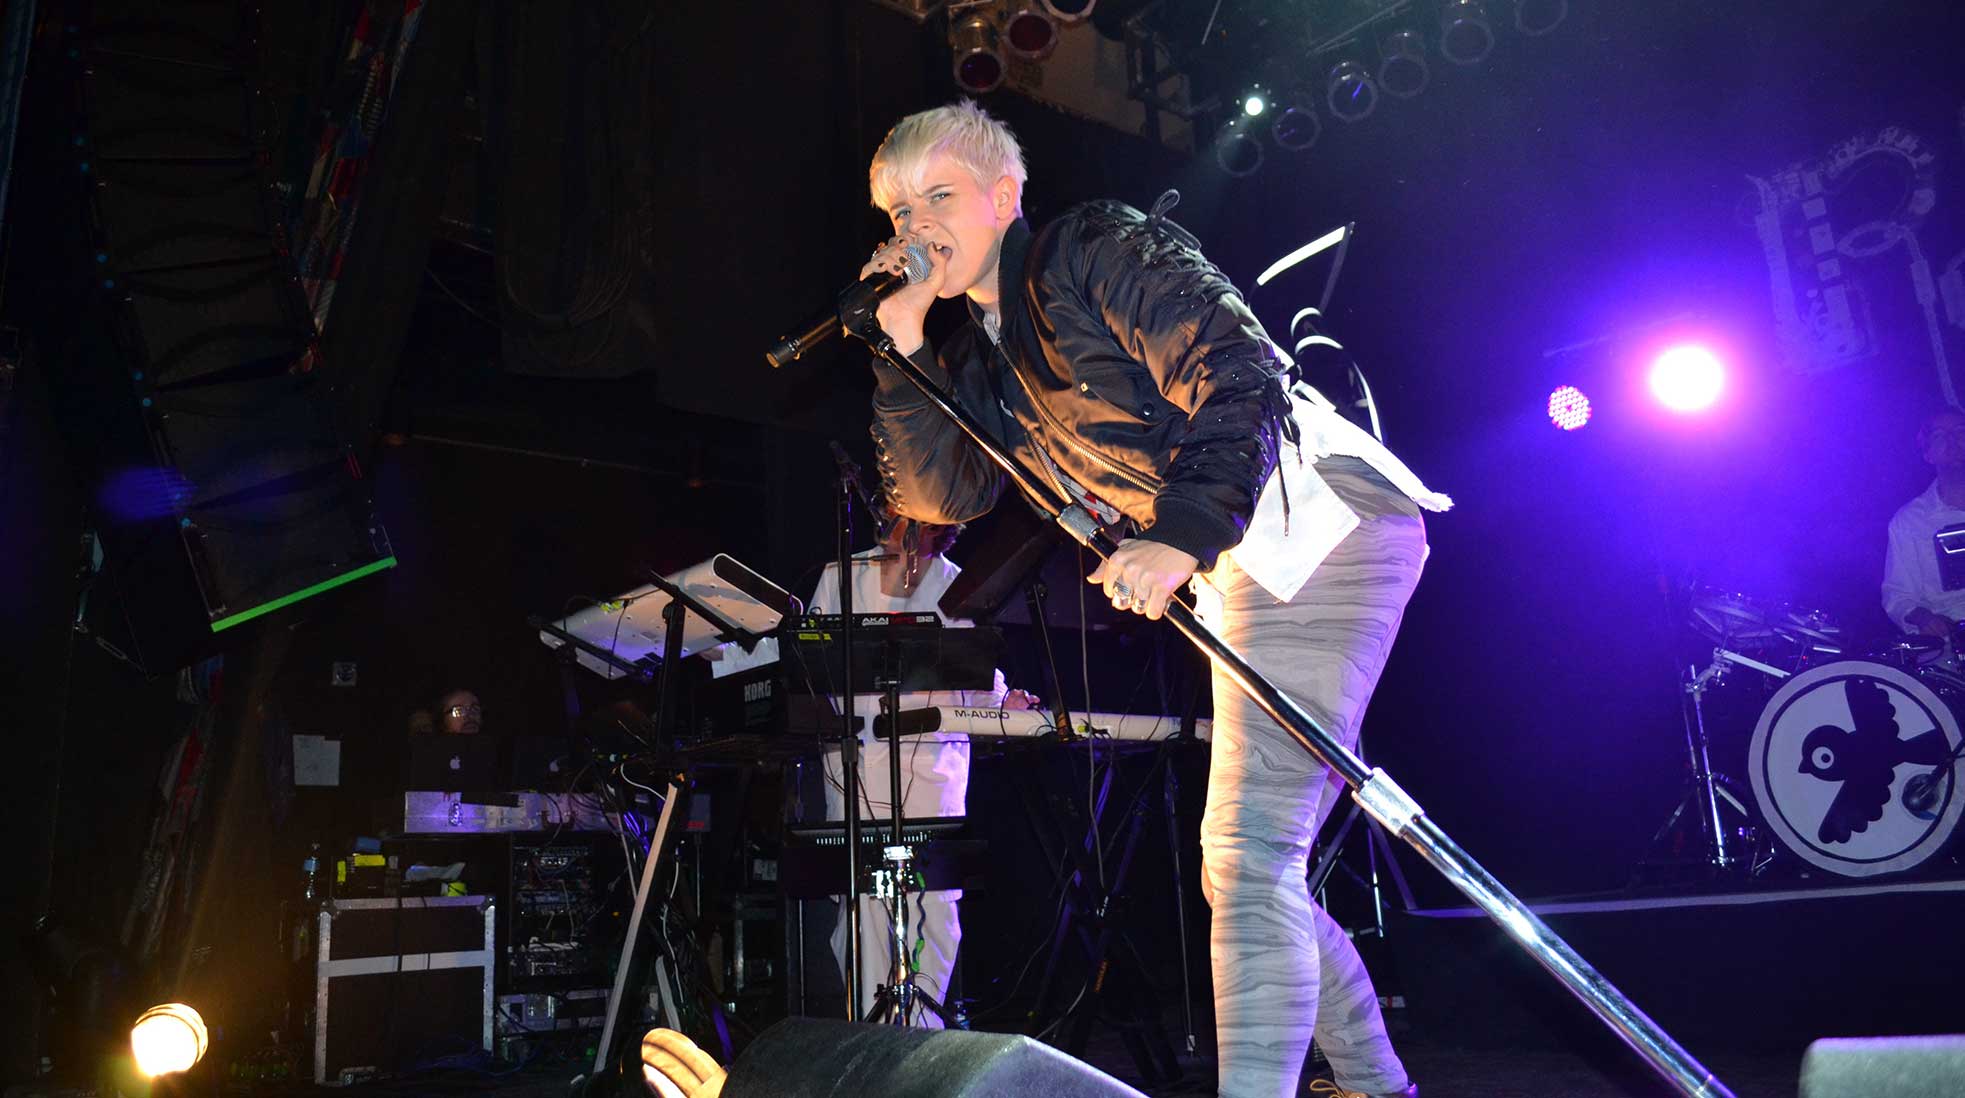 Robyn performing at the House of Blues in Cleveland, Ohio, USA, on February 7, 2011. Photo: The Zender Agenda / Flickr (CC BY 2.0) 